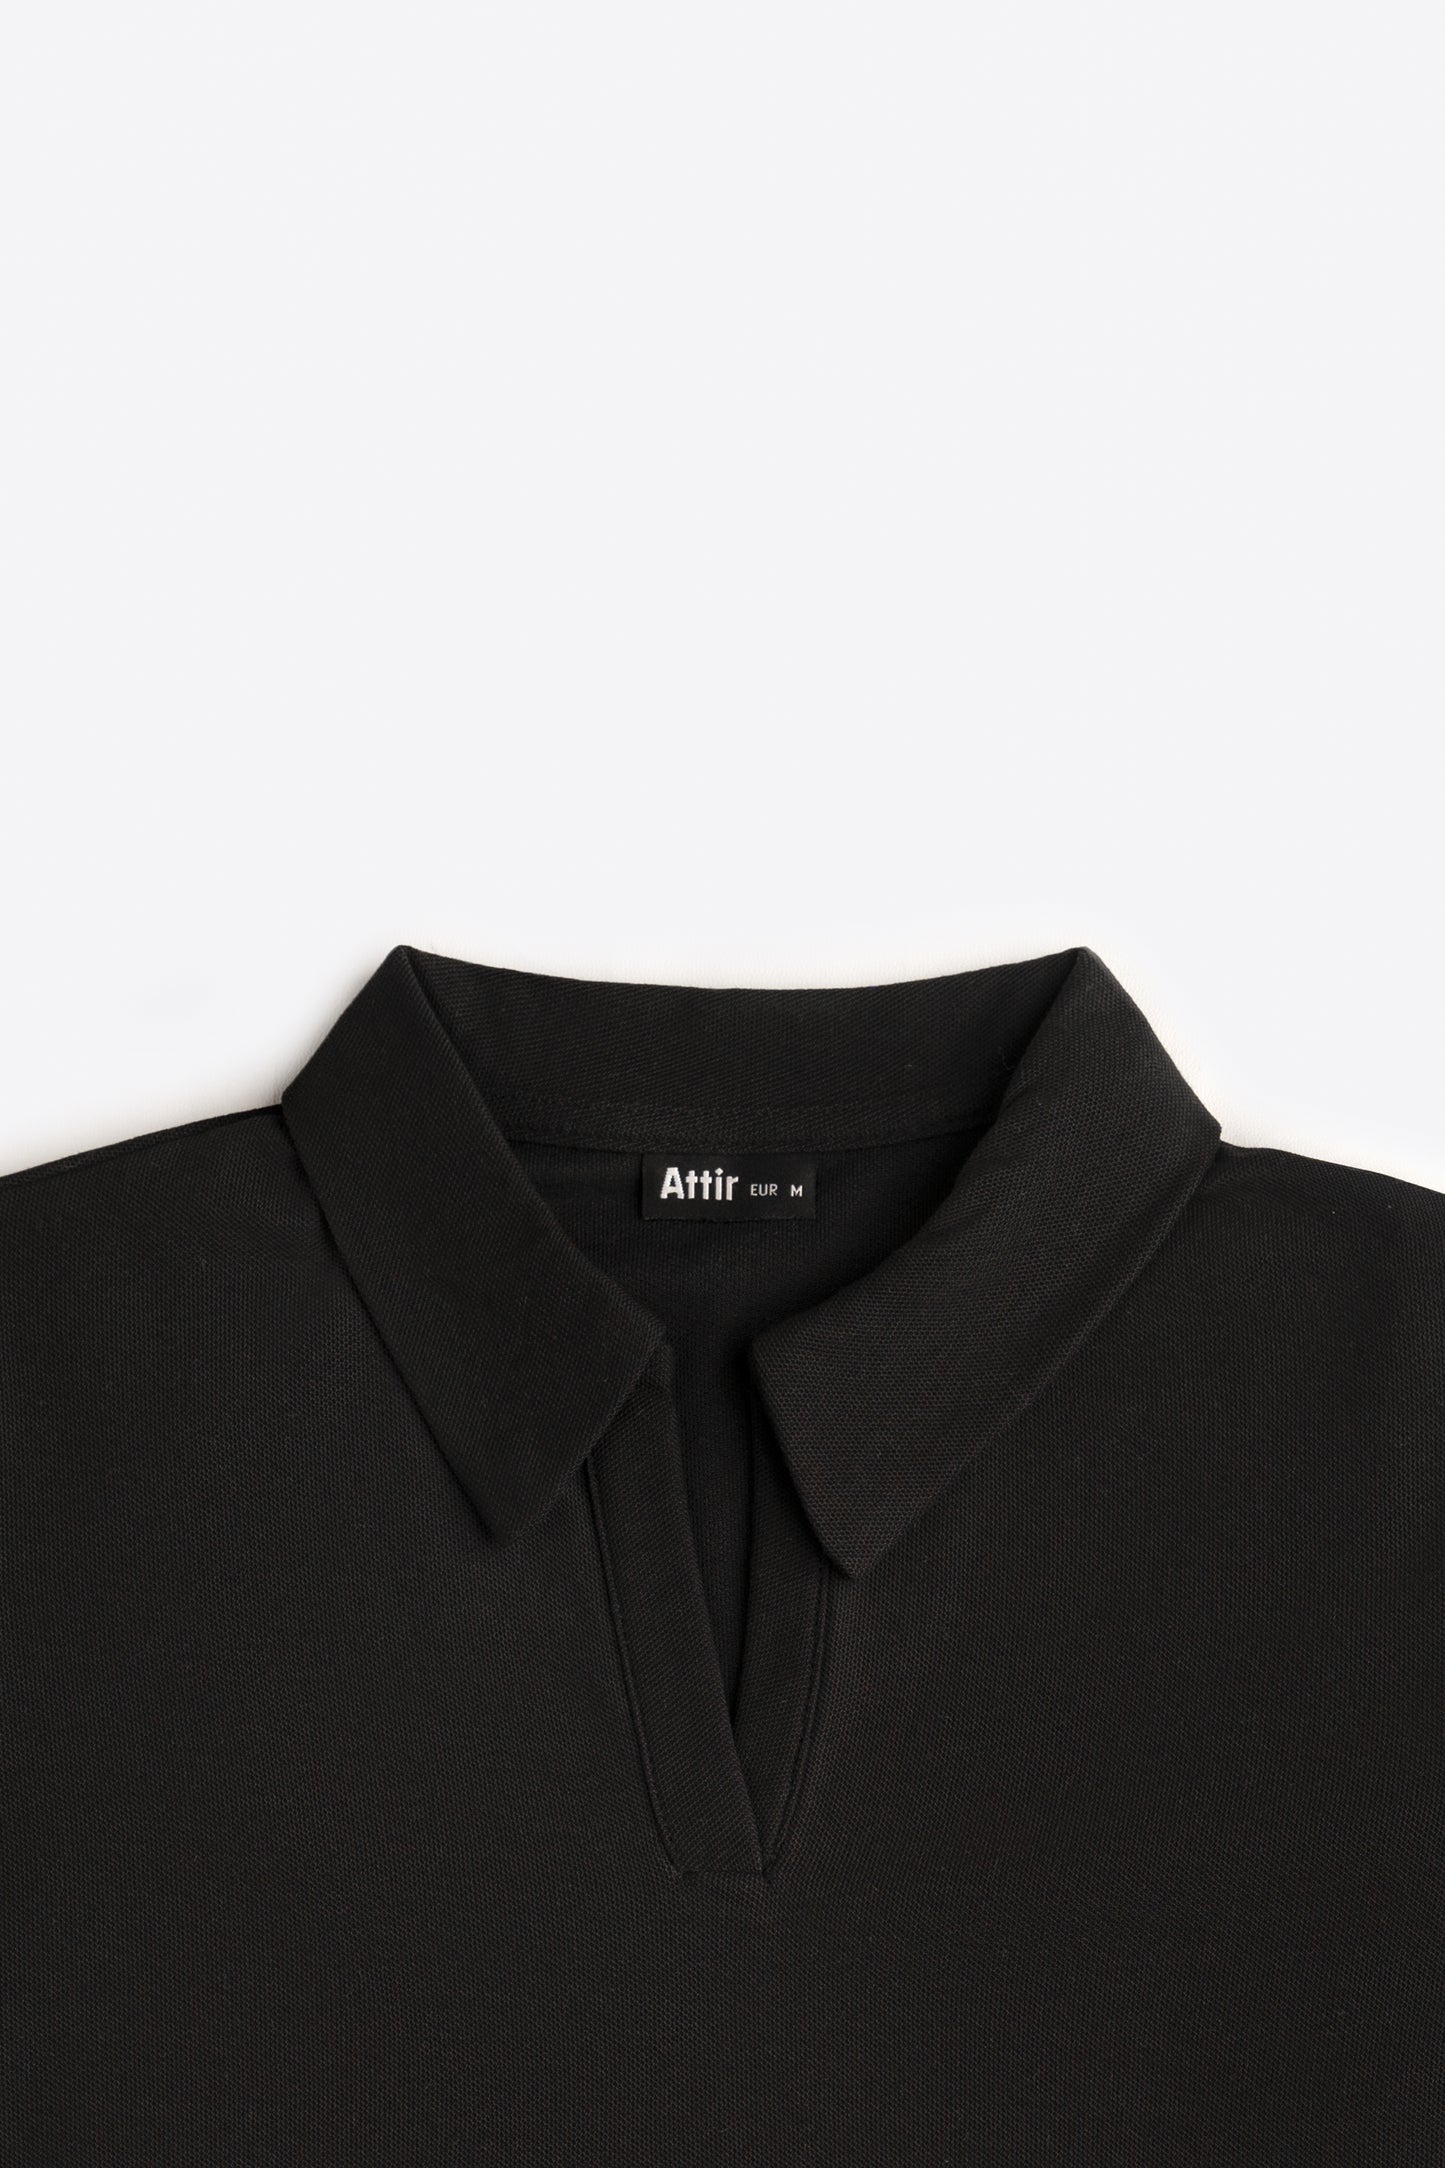 Cropped Polo Top in Ink Black